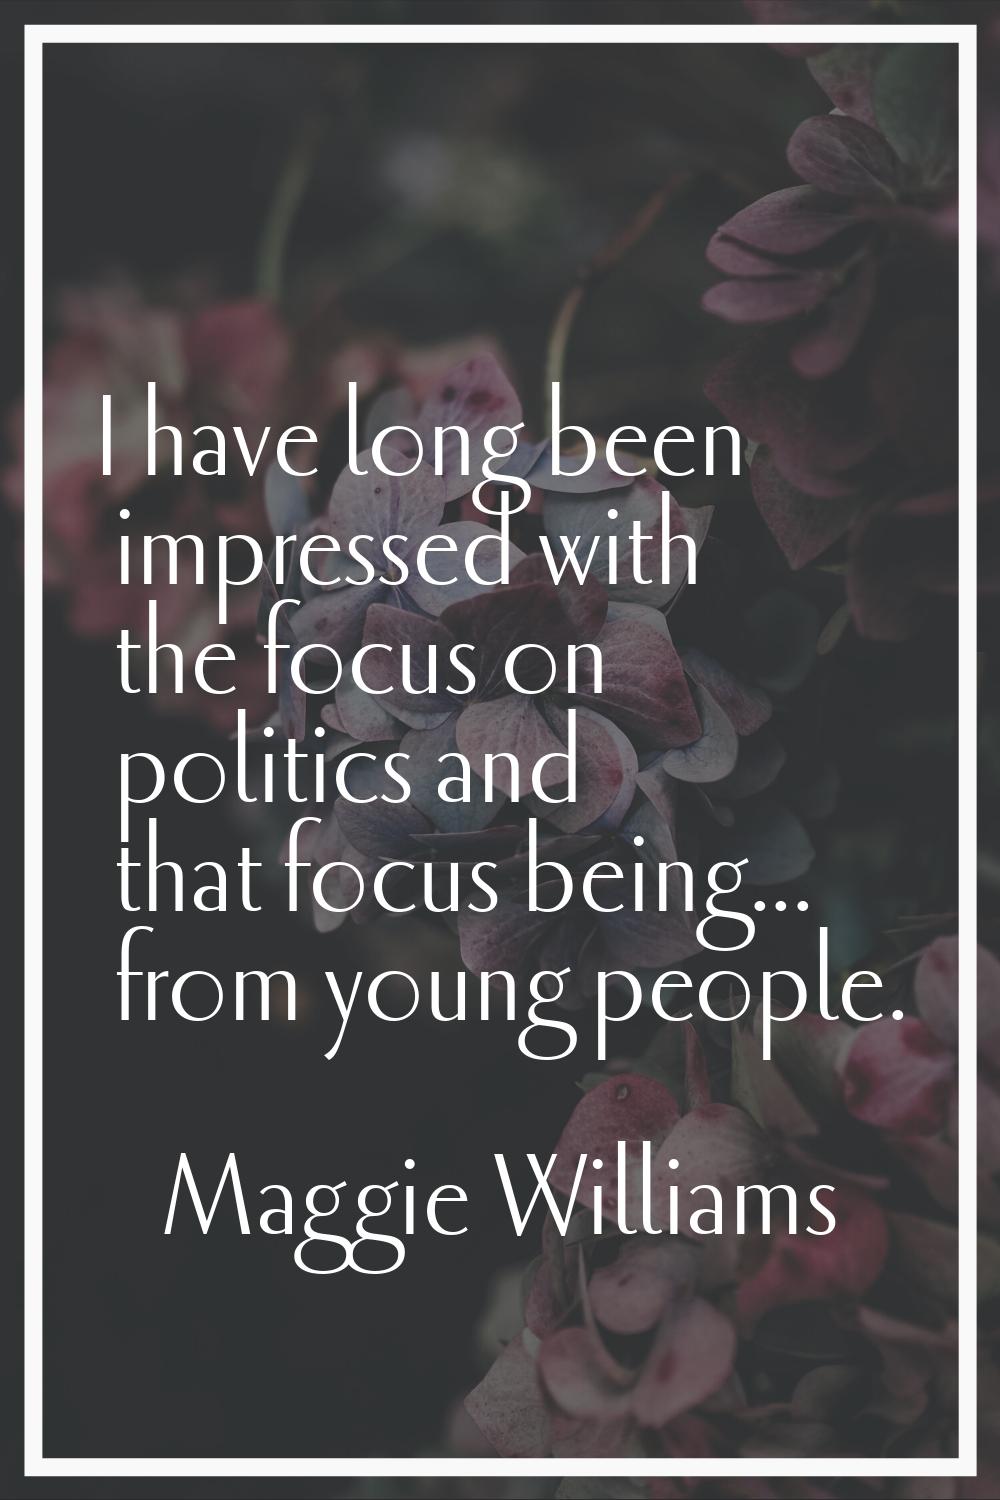 I have long been impressed with the focus on politics and that focus being... from young people.